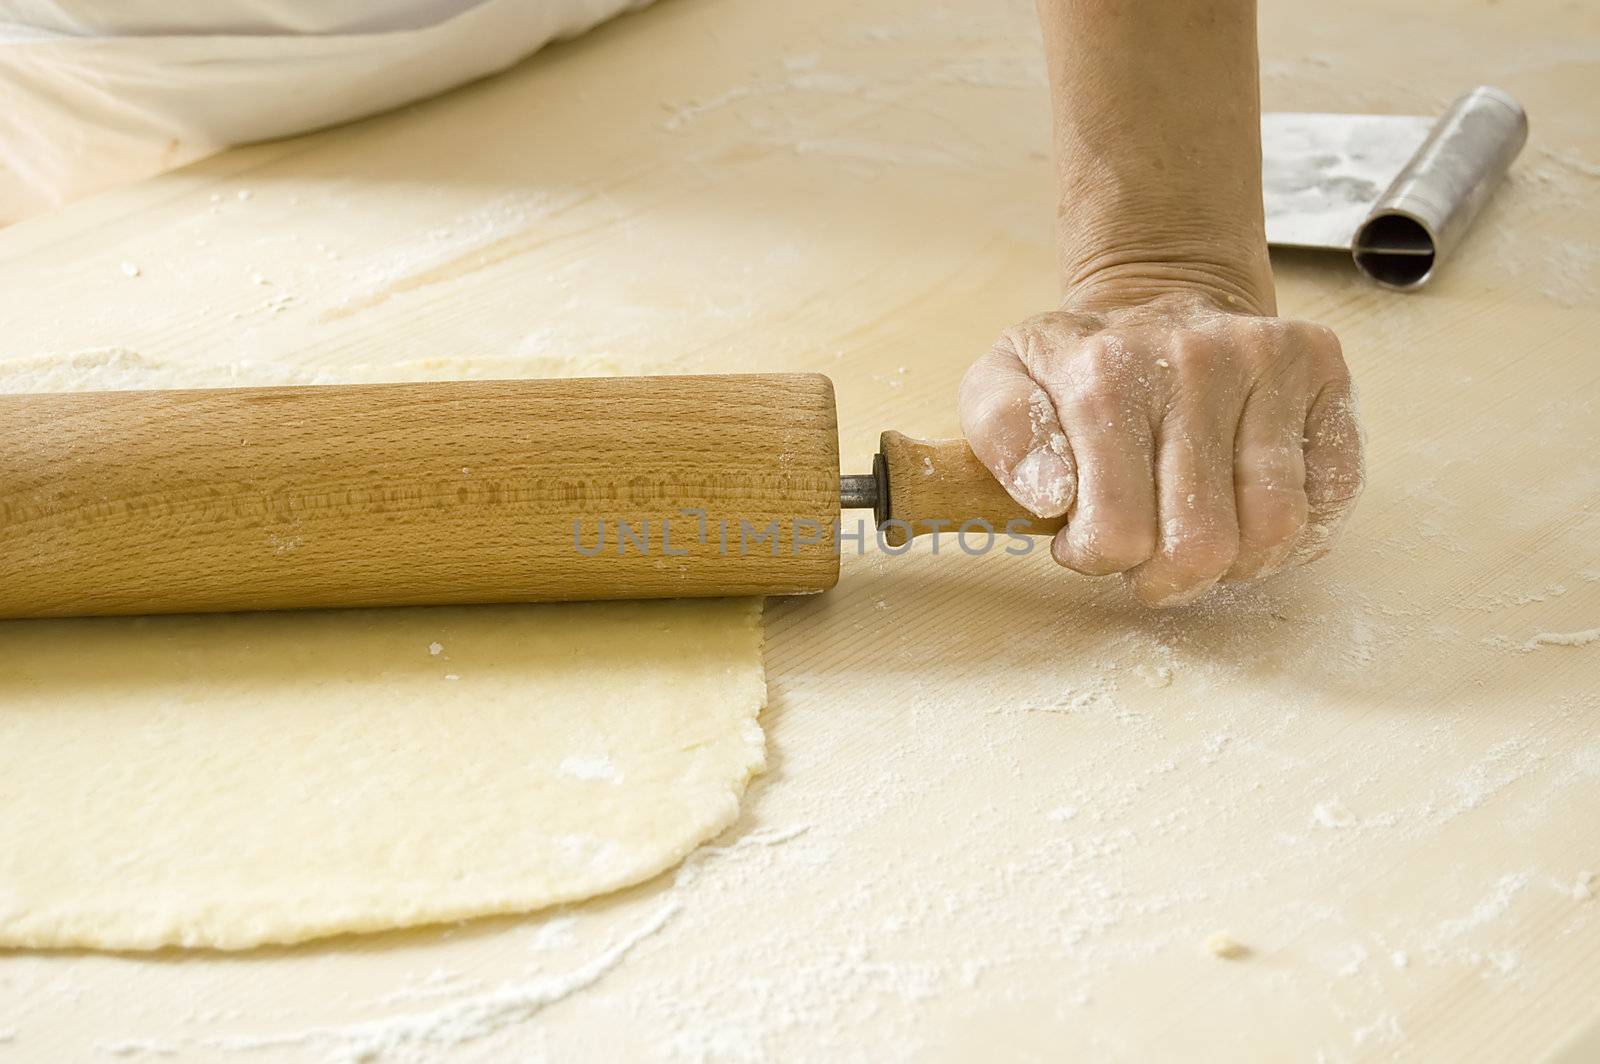 Hand works with rolling pin in kitchen